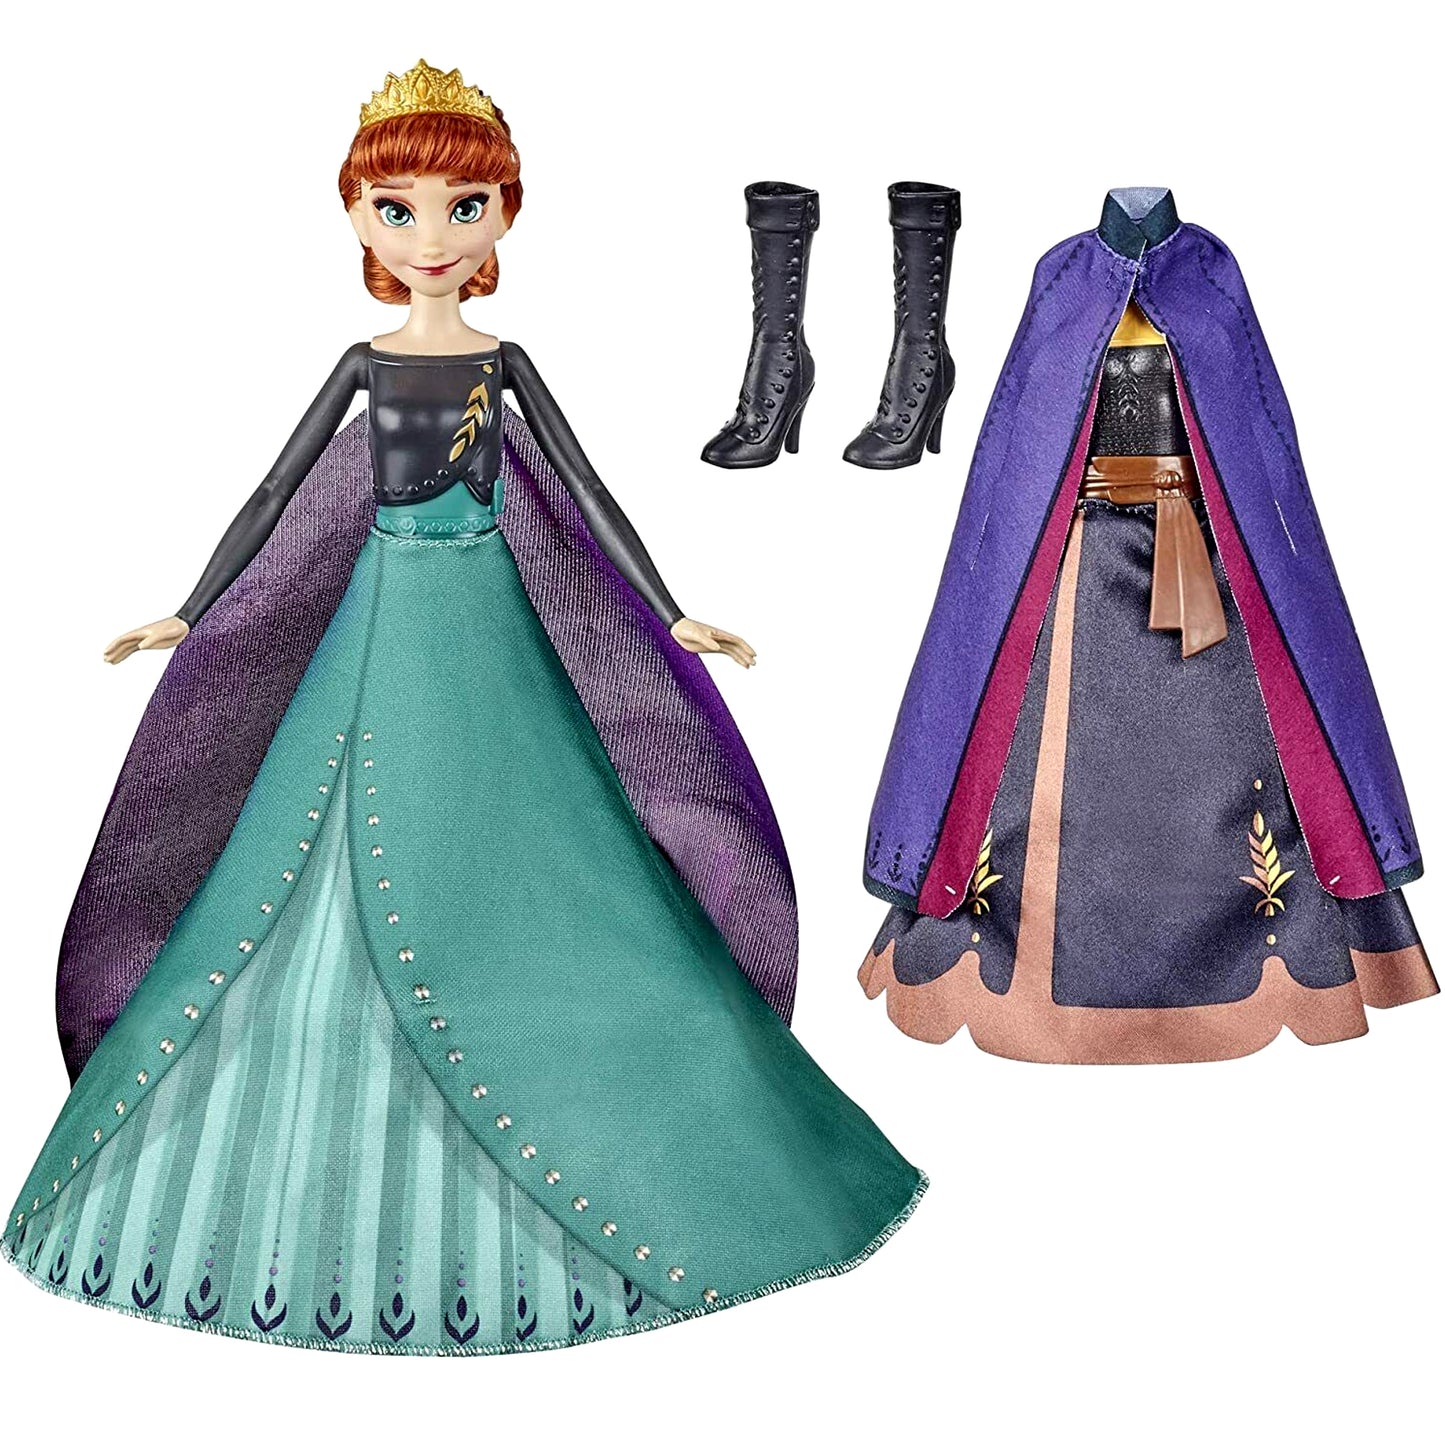 Disney Frozen - Queen Transformation Doll (Styles Vary - One Supplied)